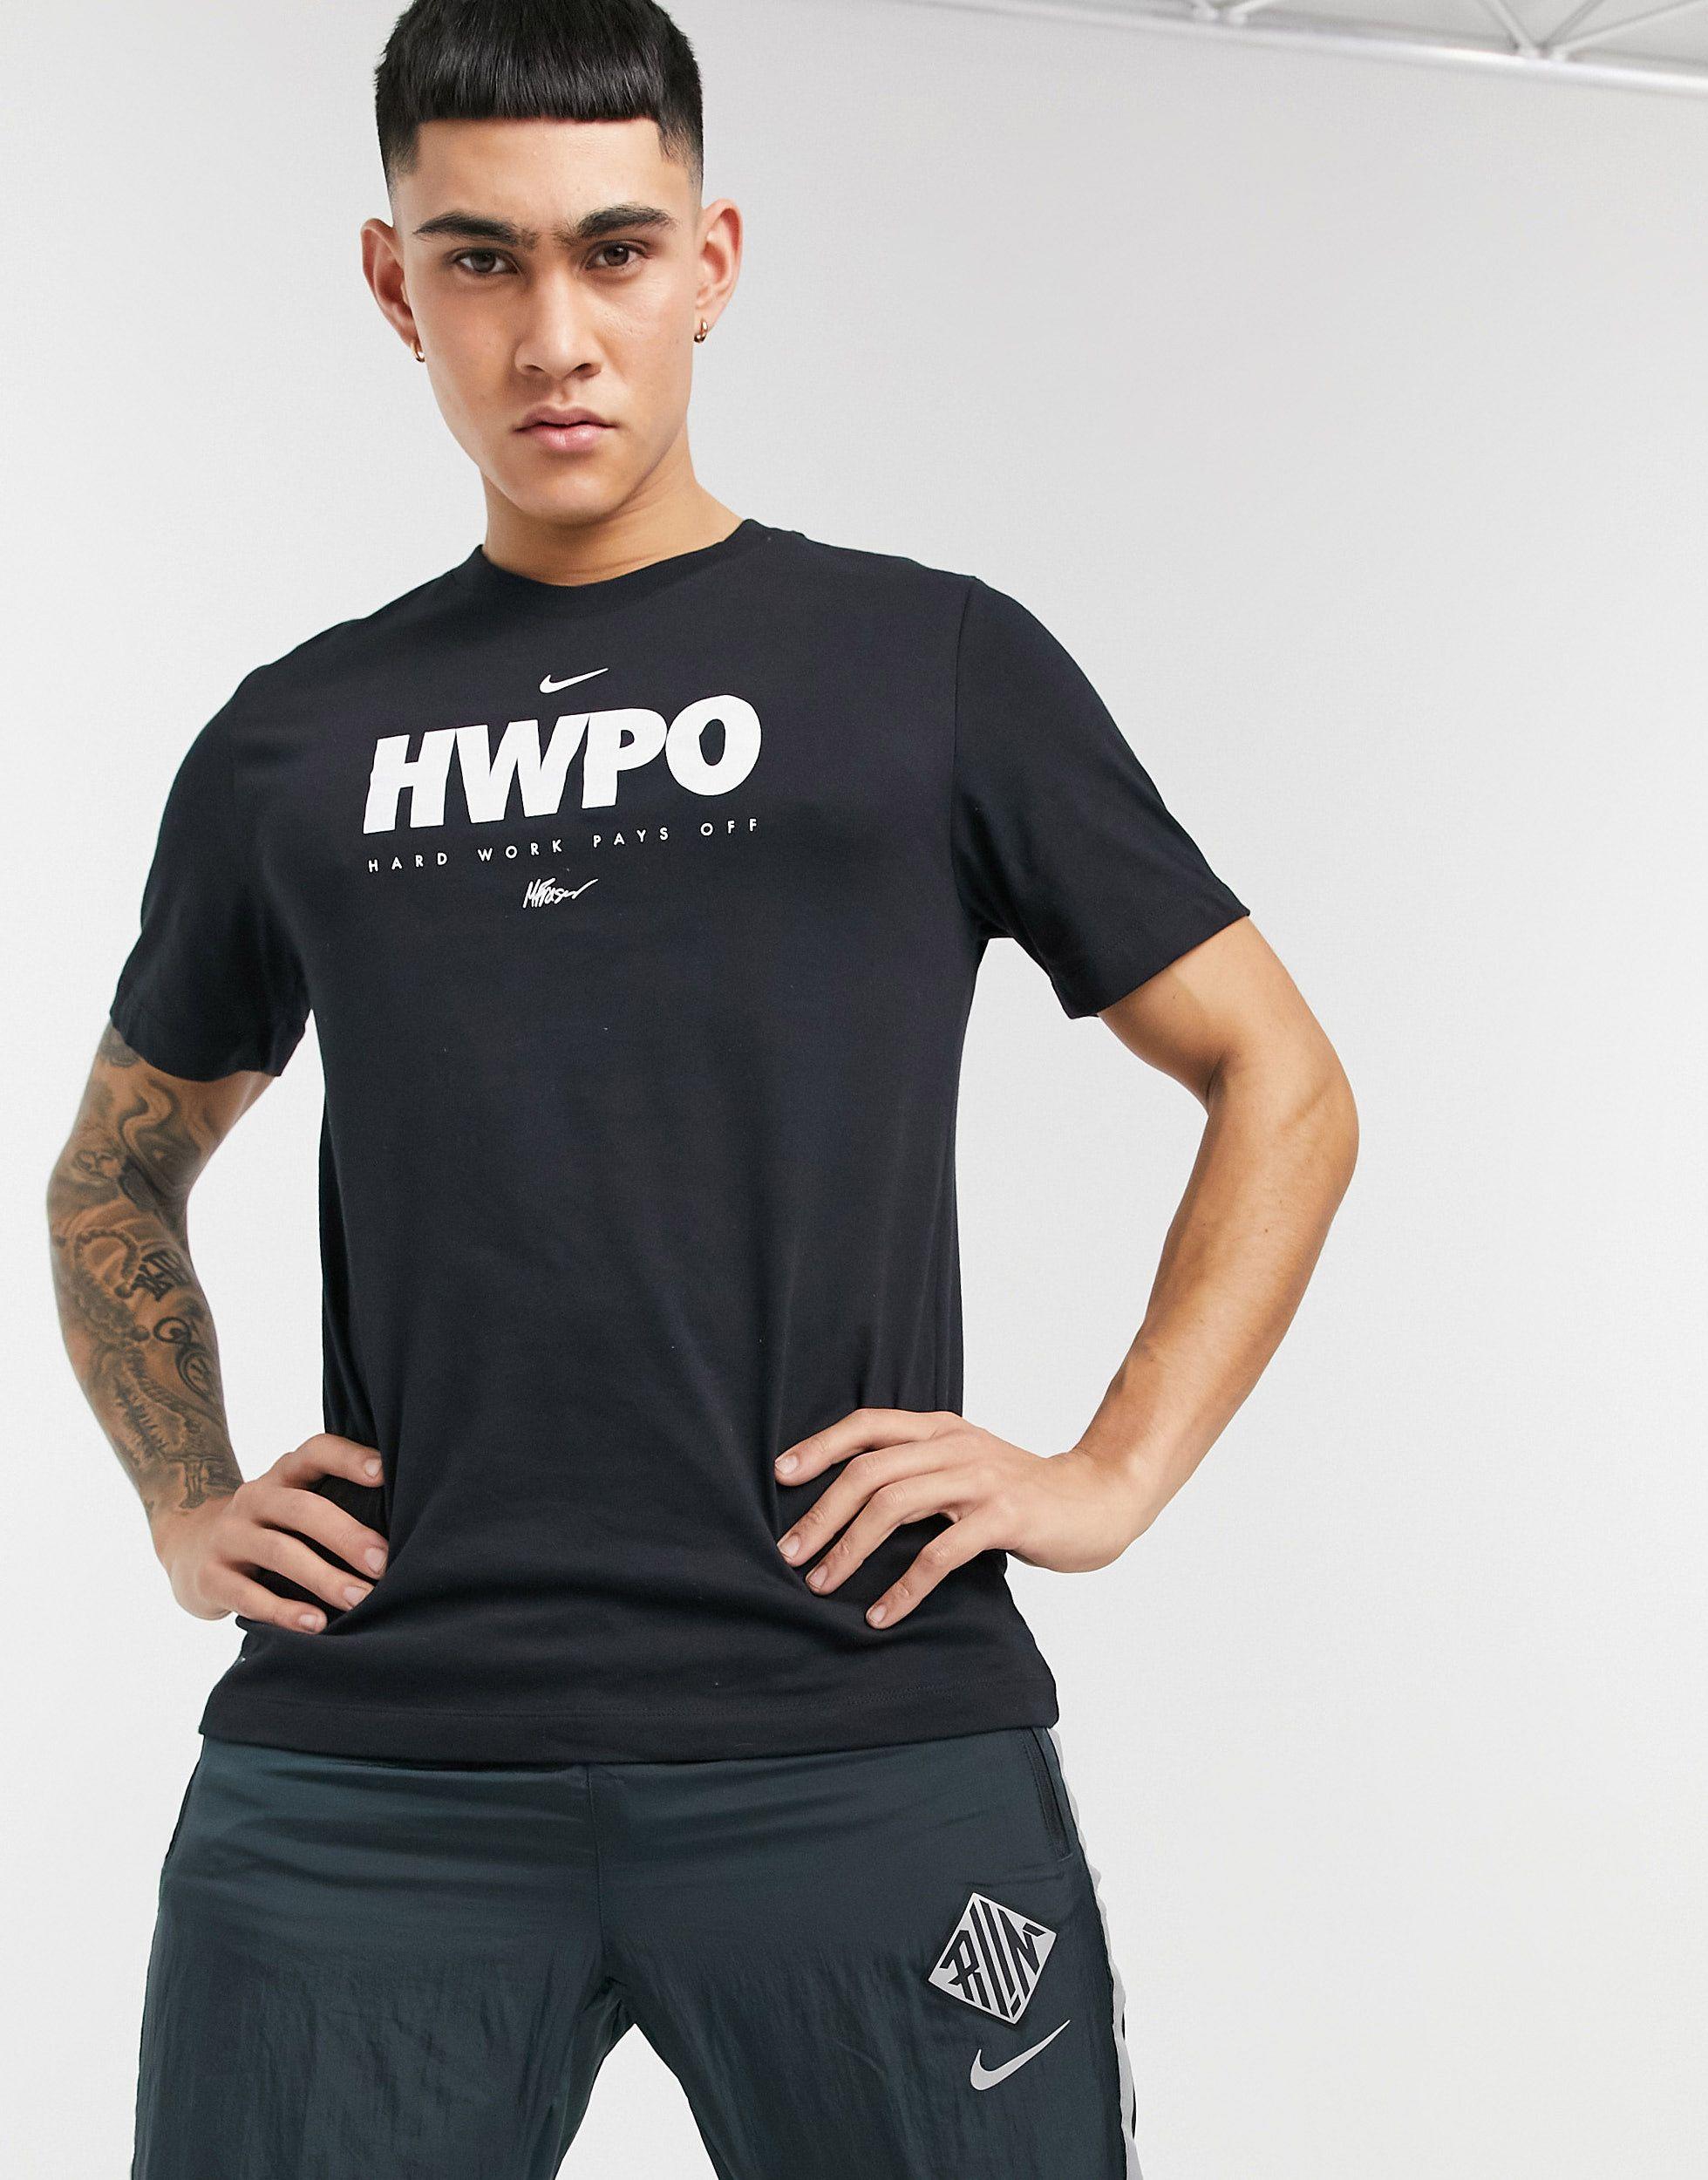 Nike Hwpo Graphic T-shirt in Black for Men - Lyst